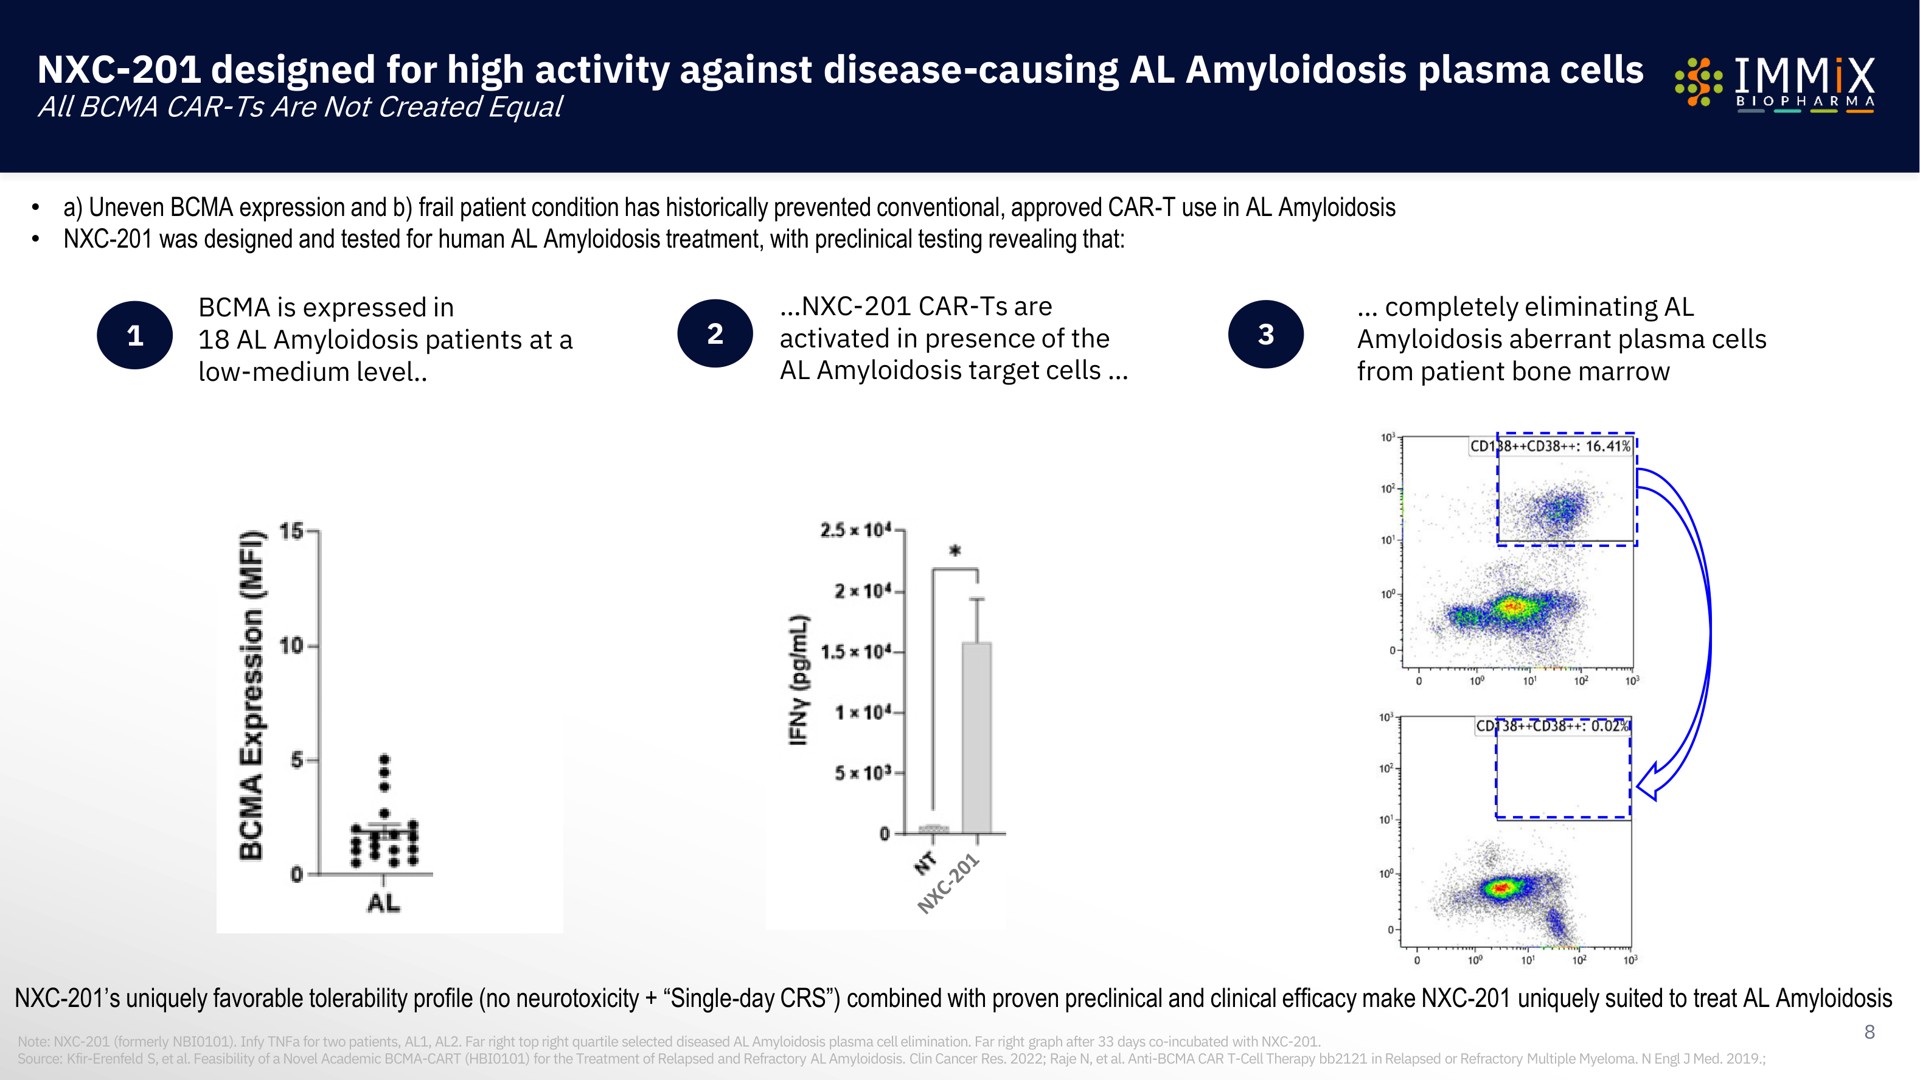 designed for high activity against disease causing amyloidosis plasma cells | Immix Biopharma